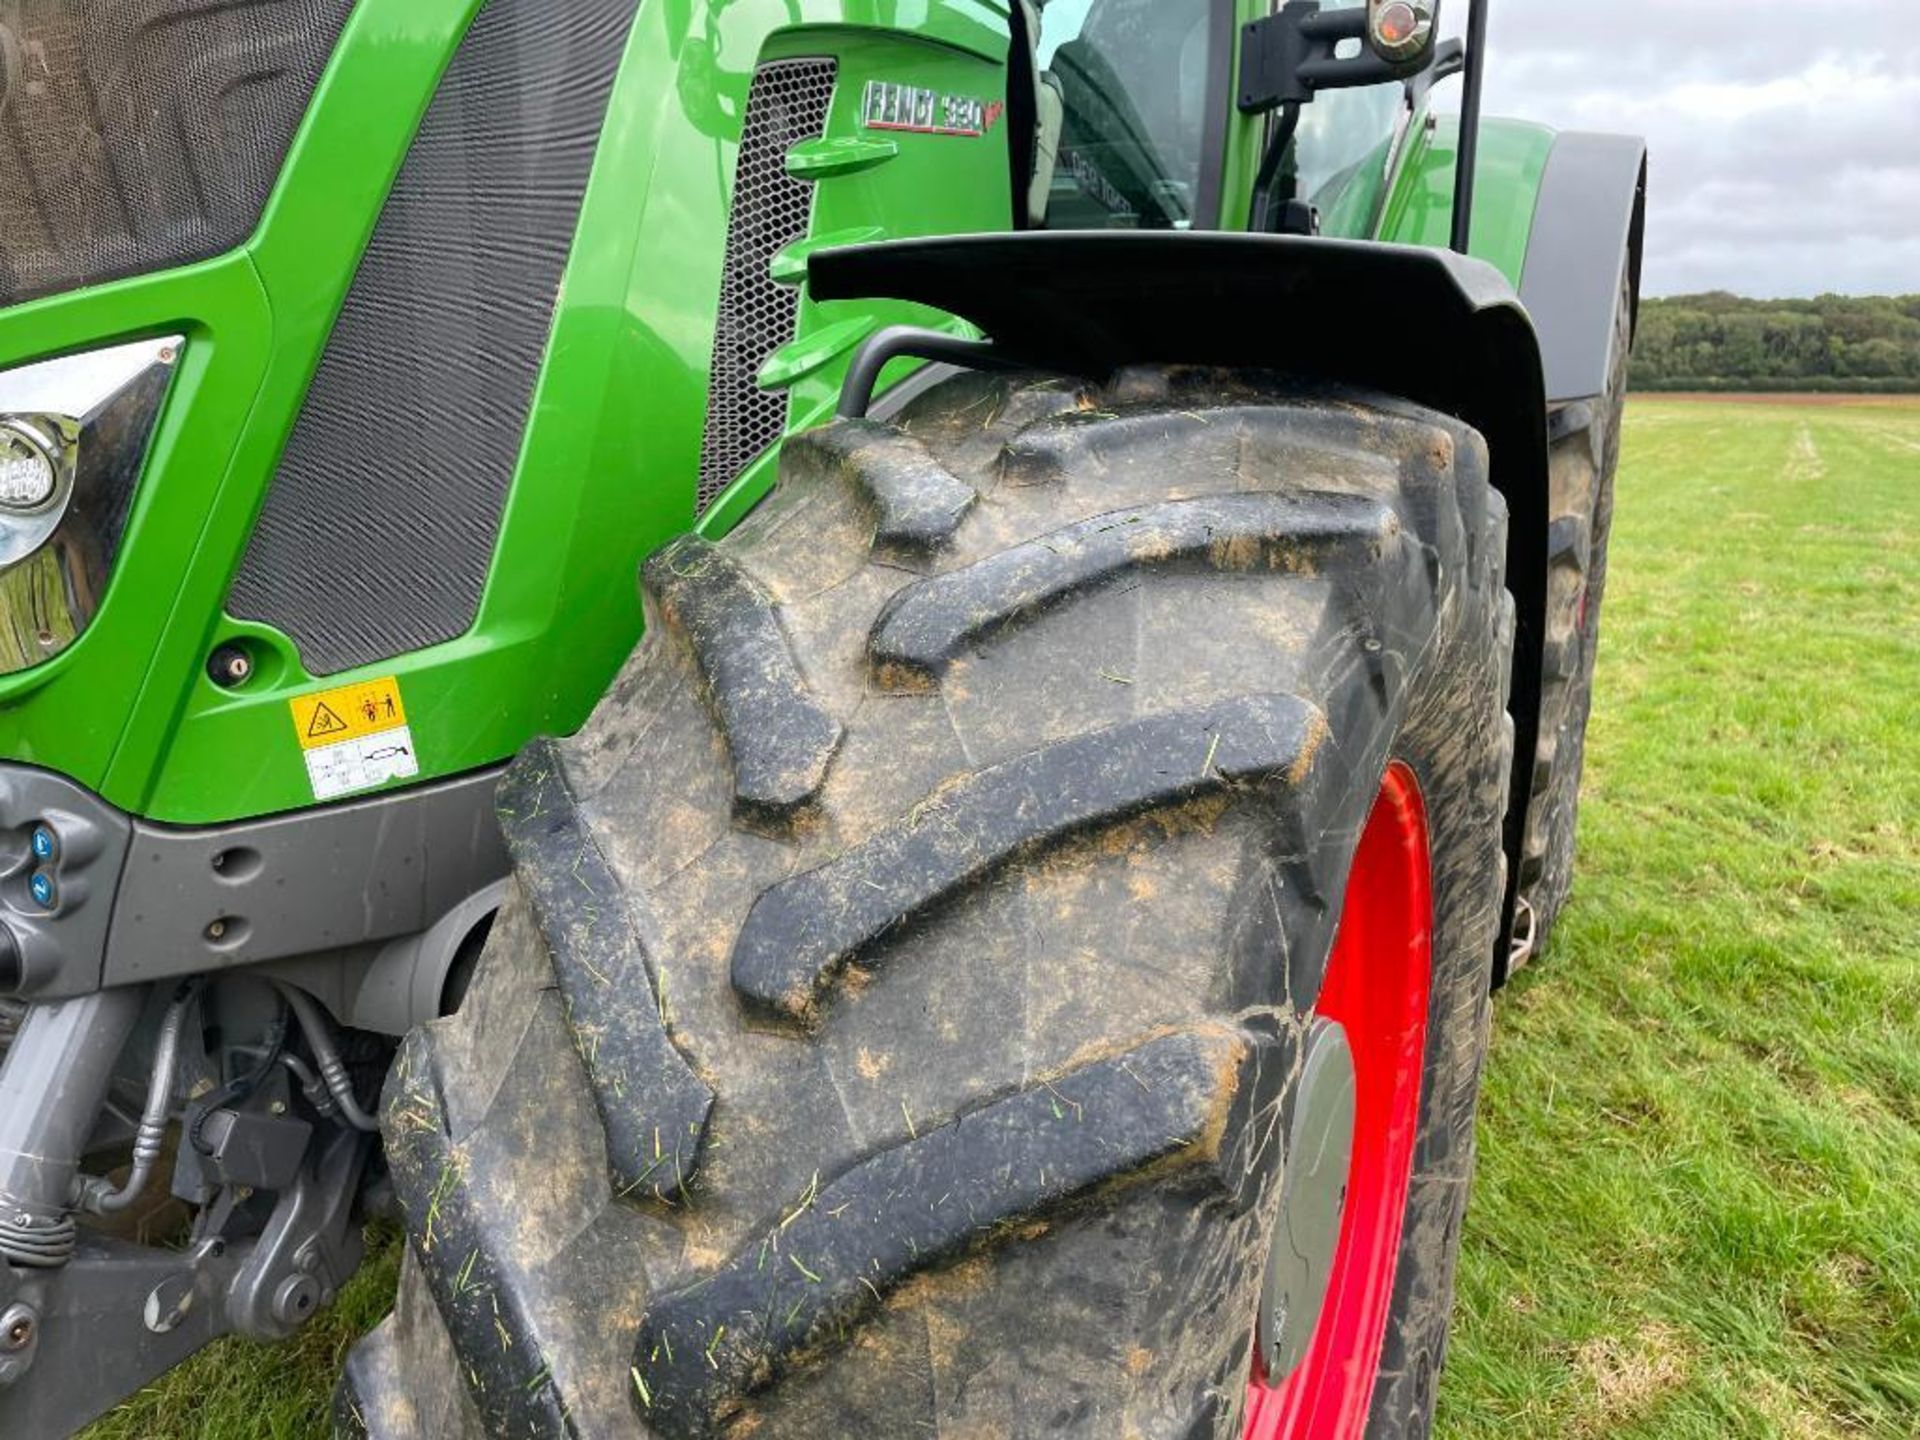 2018 Fendt 930 Vario Profi Plus 65kph 4wd tractor with front and cab suspension, front linkage and h - Image 3 of 20